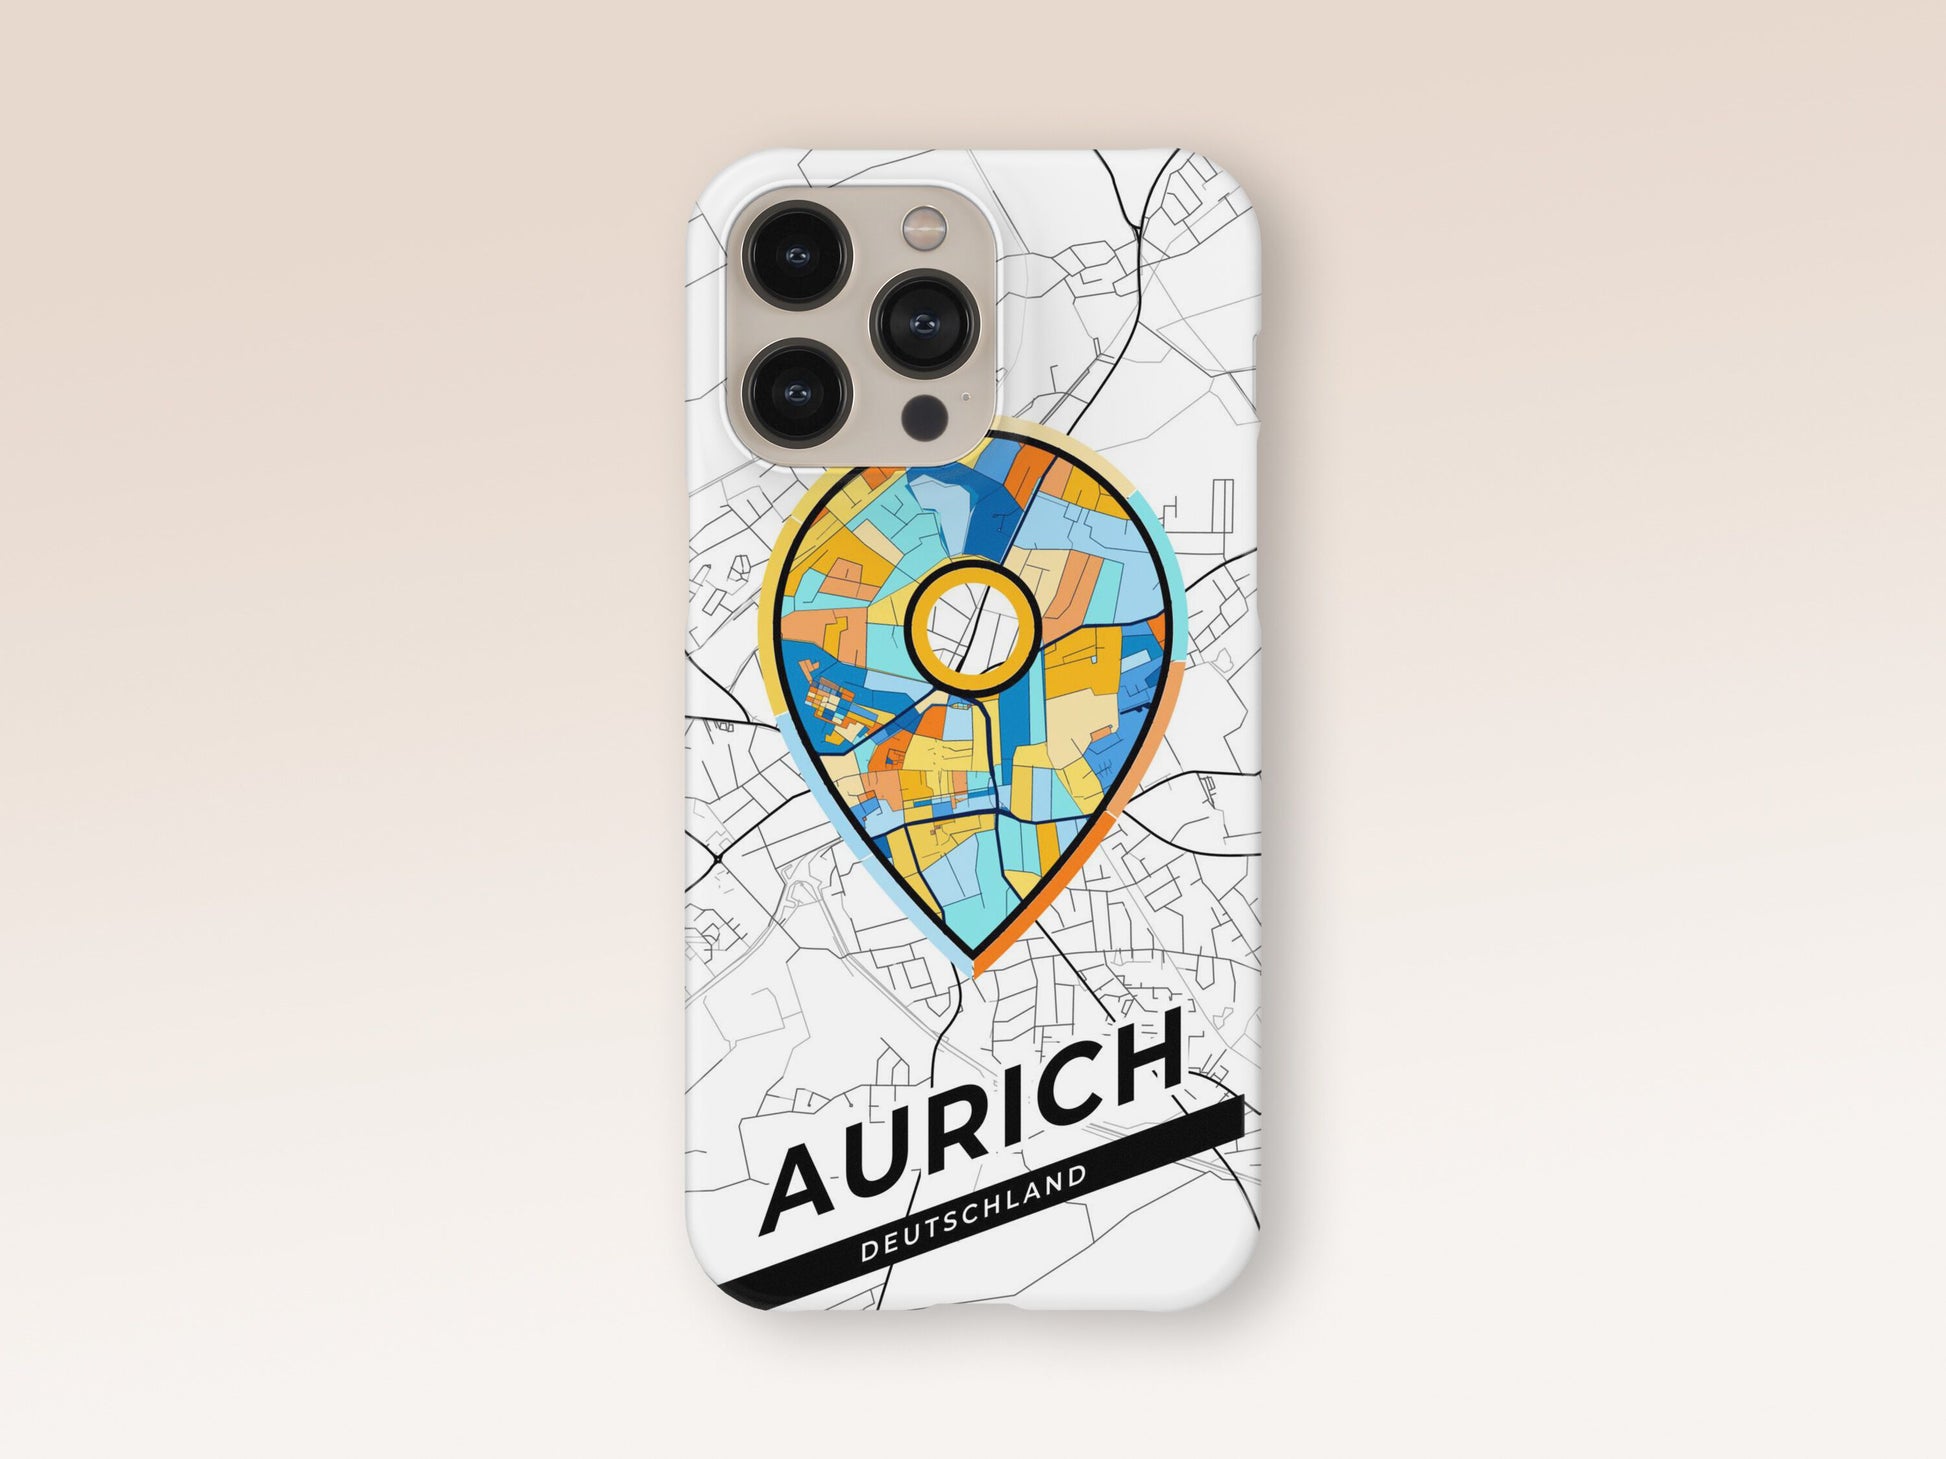 Aurich Deutschland slim phone case with colorful icon. Birthday, wedding or housewarming gift. Couple match cases. 1